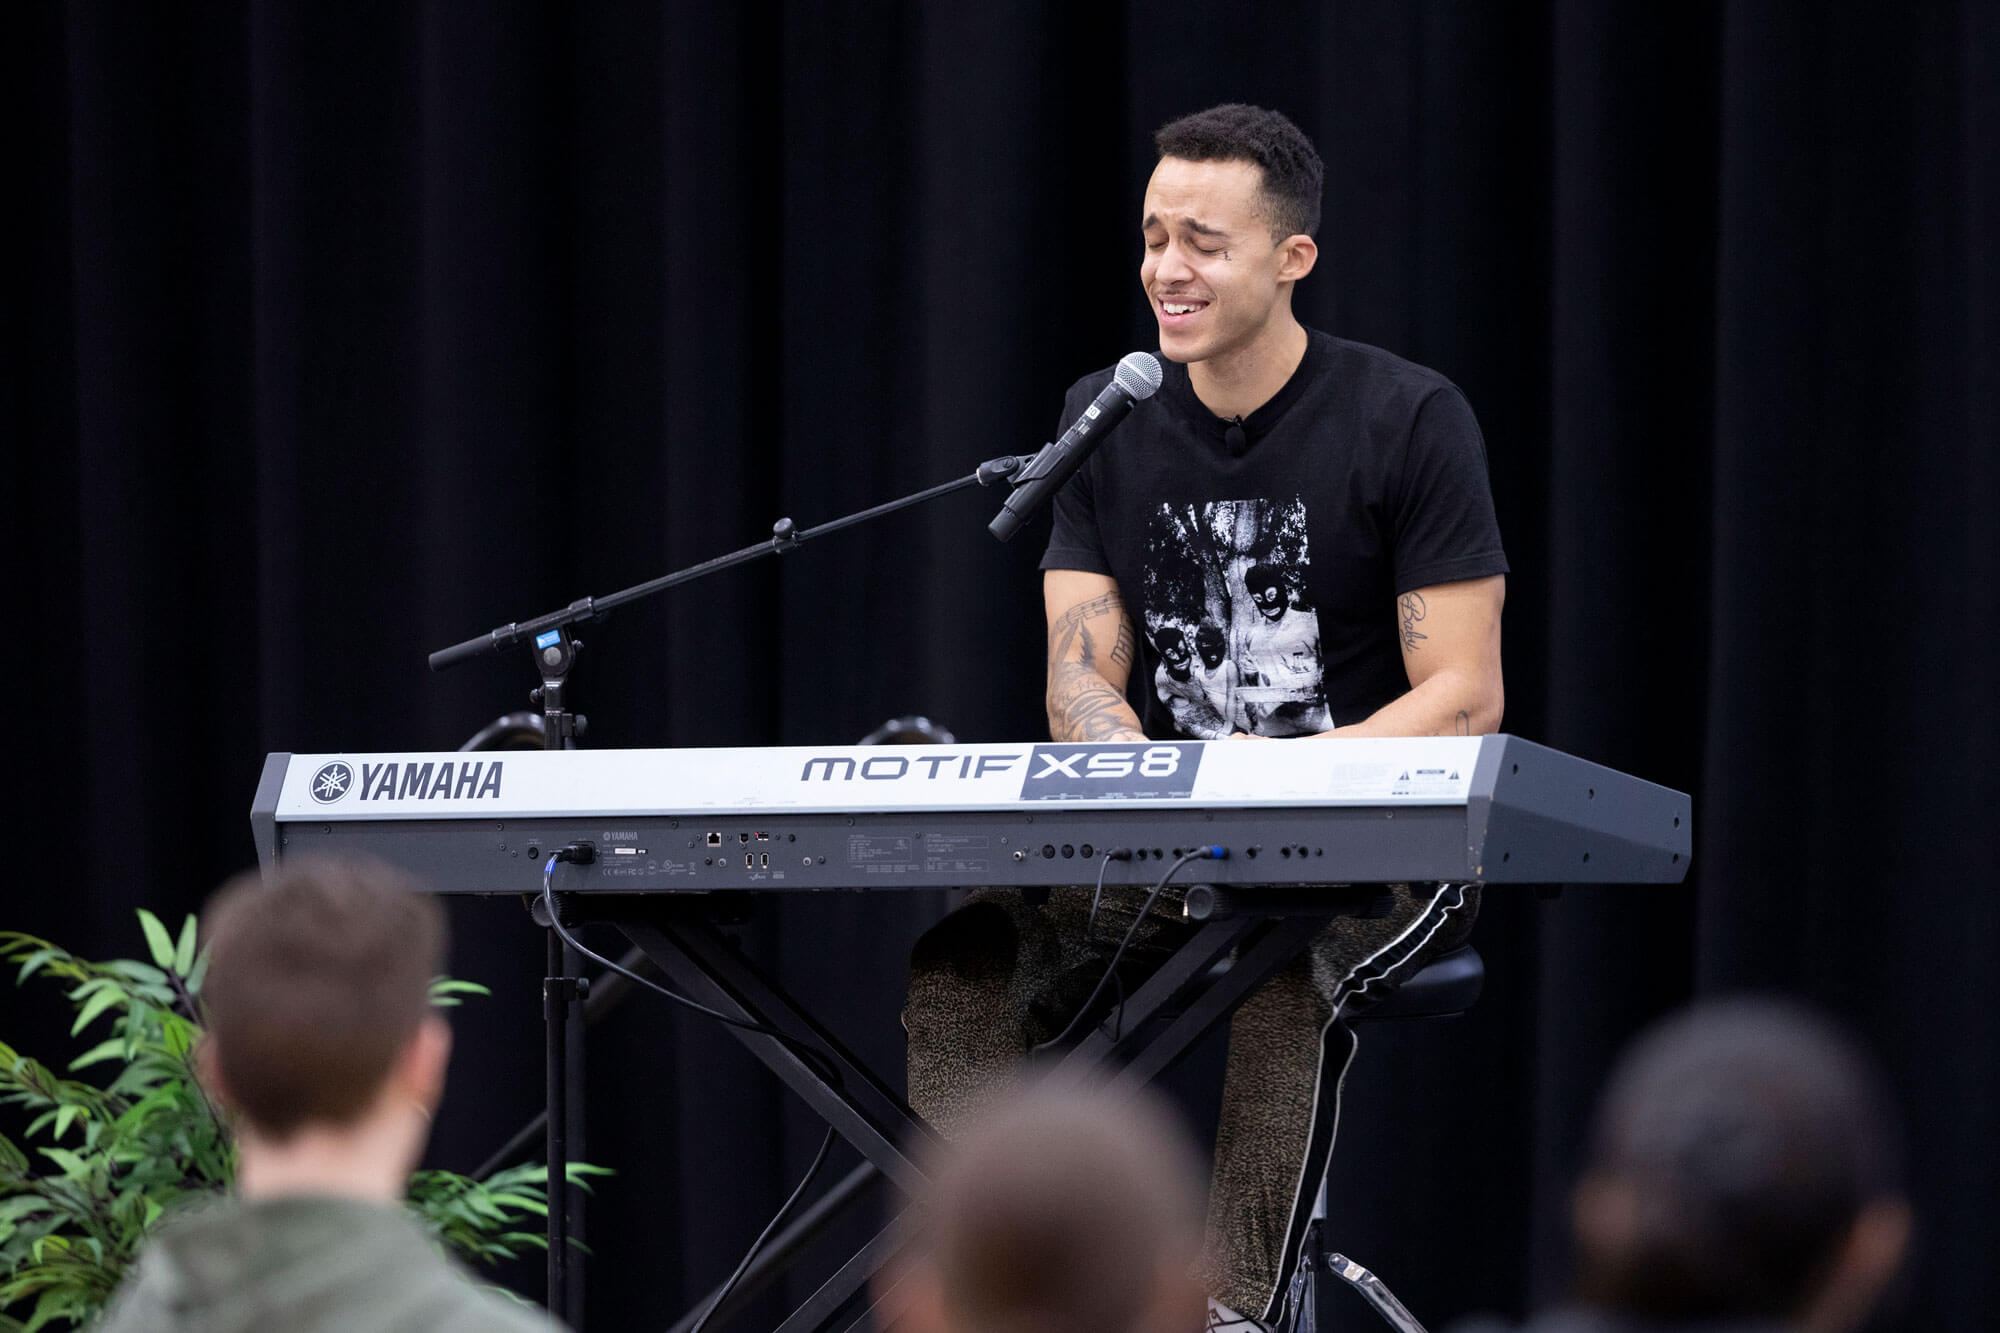 Richard Edmond-Vargas performs with a keyboard in front of an audience.